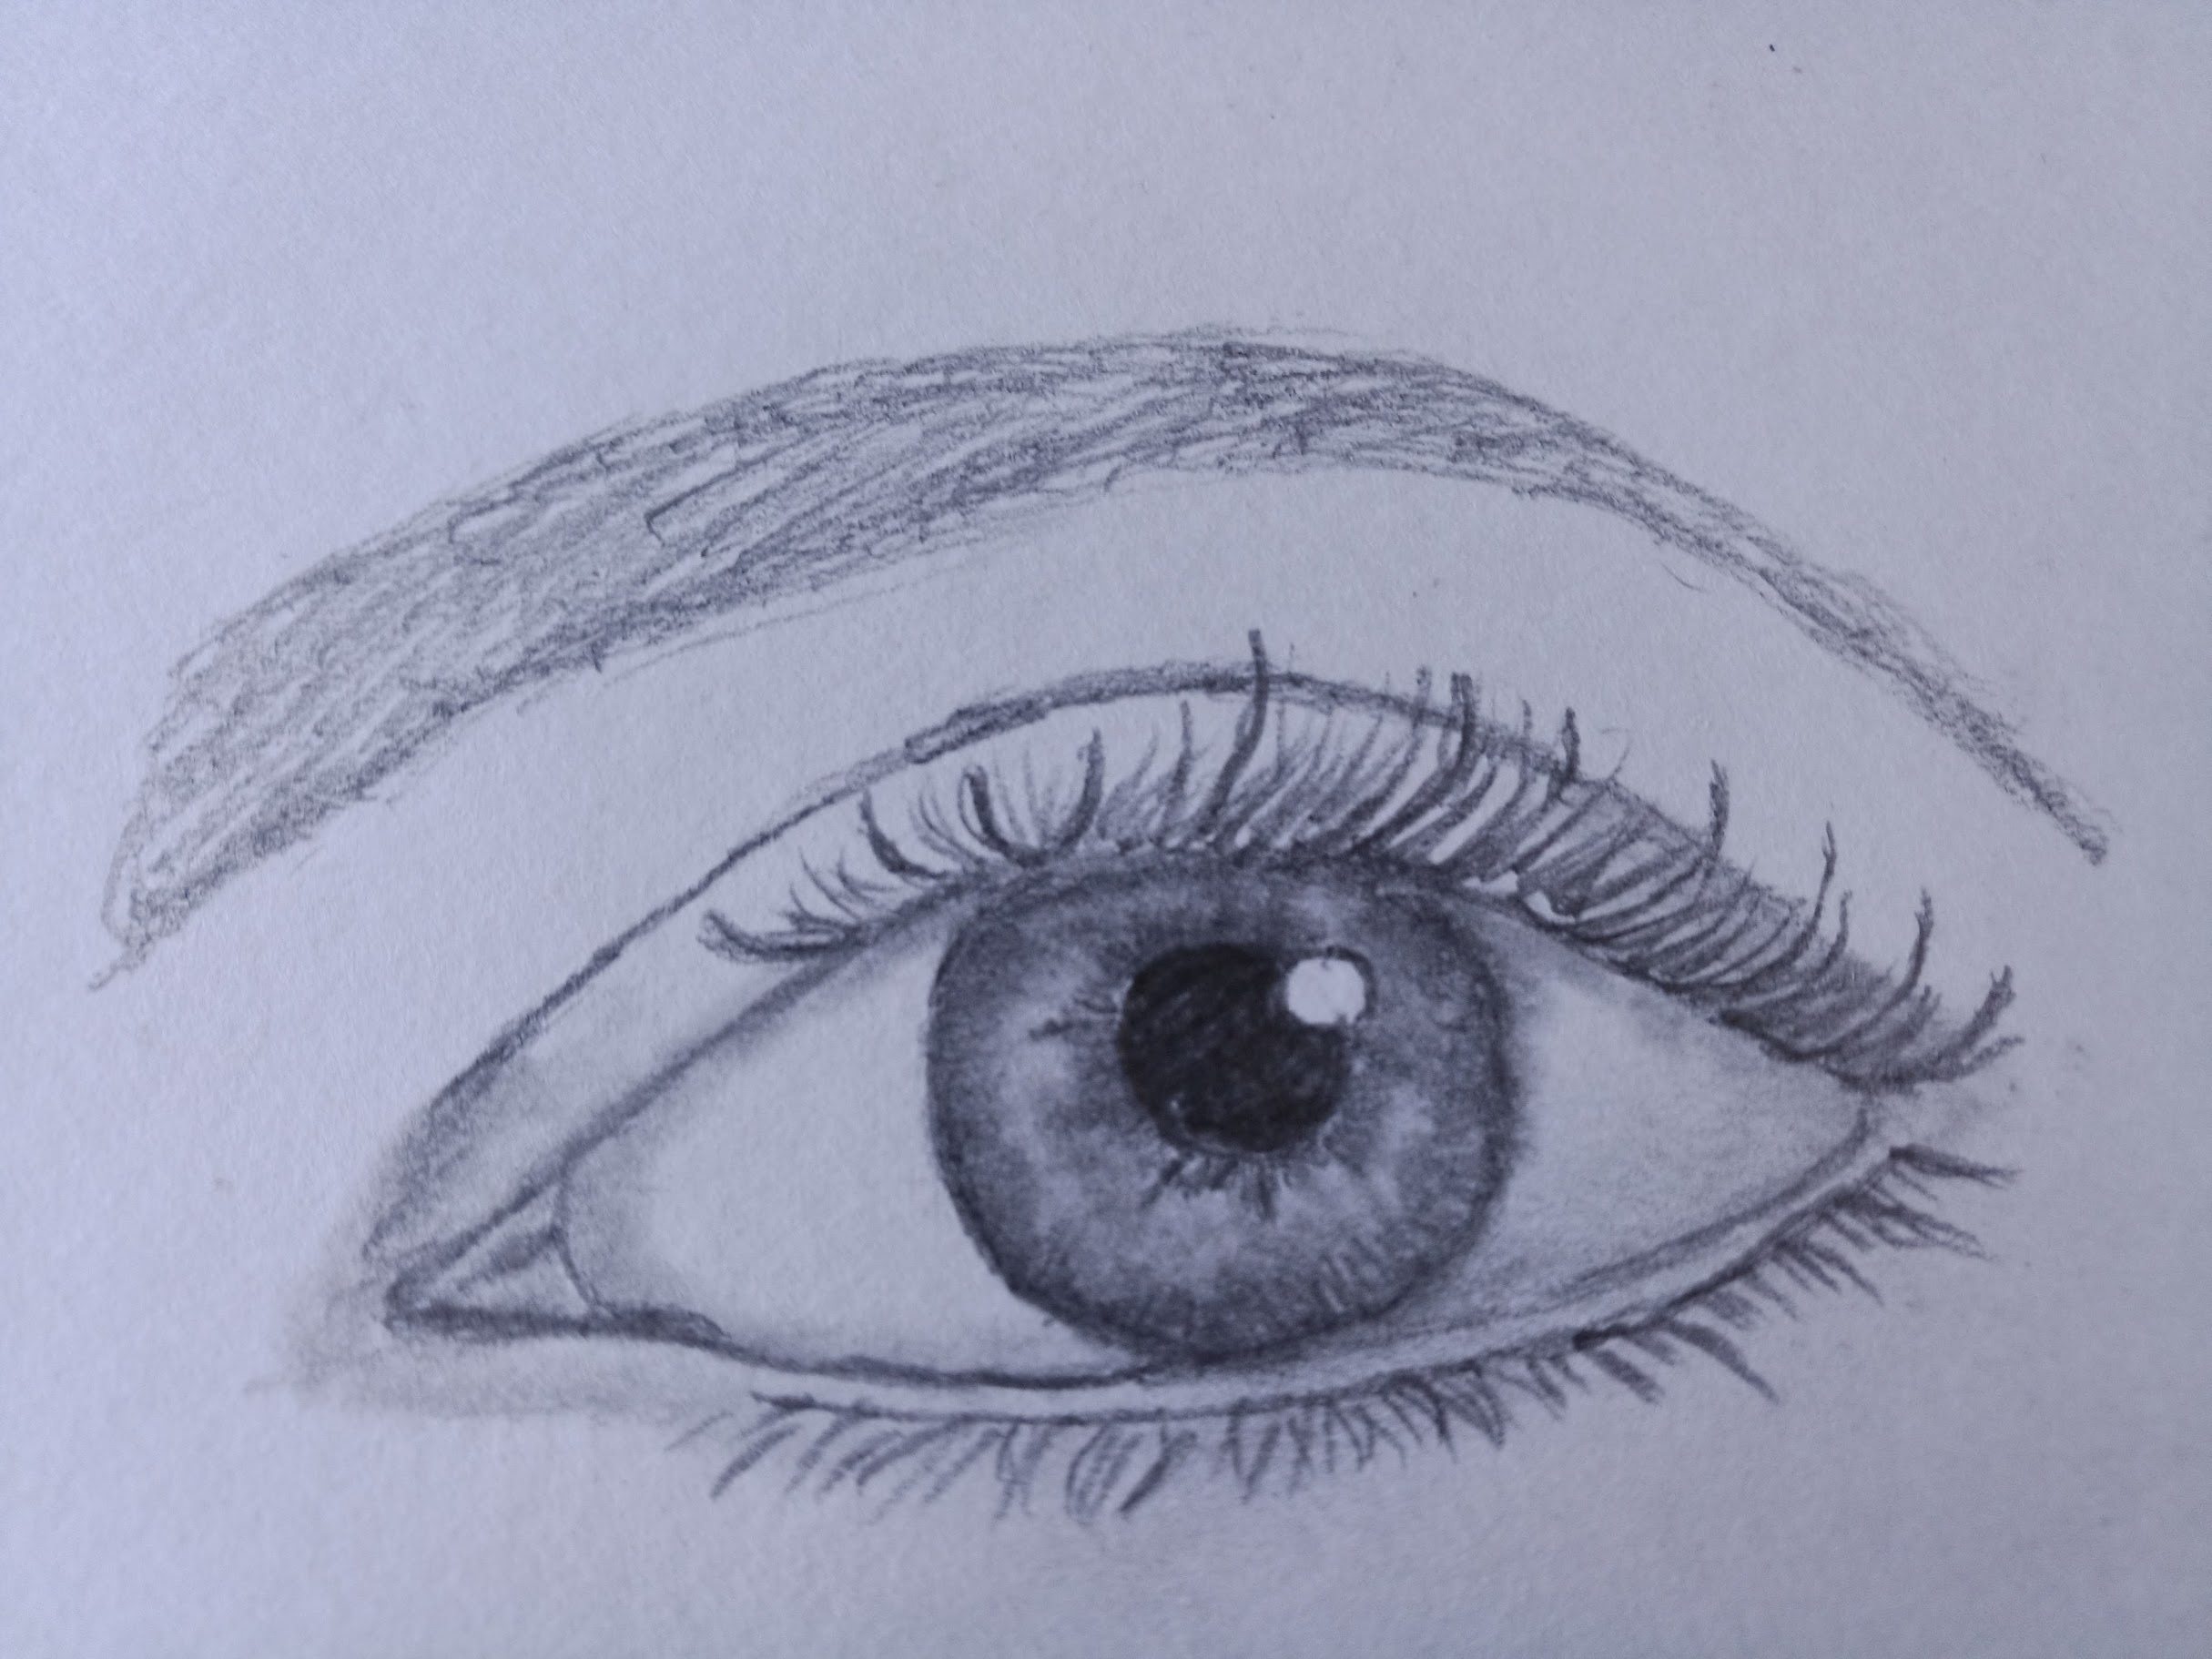 Very detailed pencil sketch of an eye.